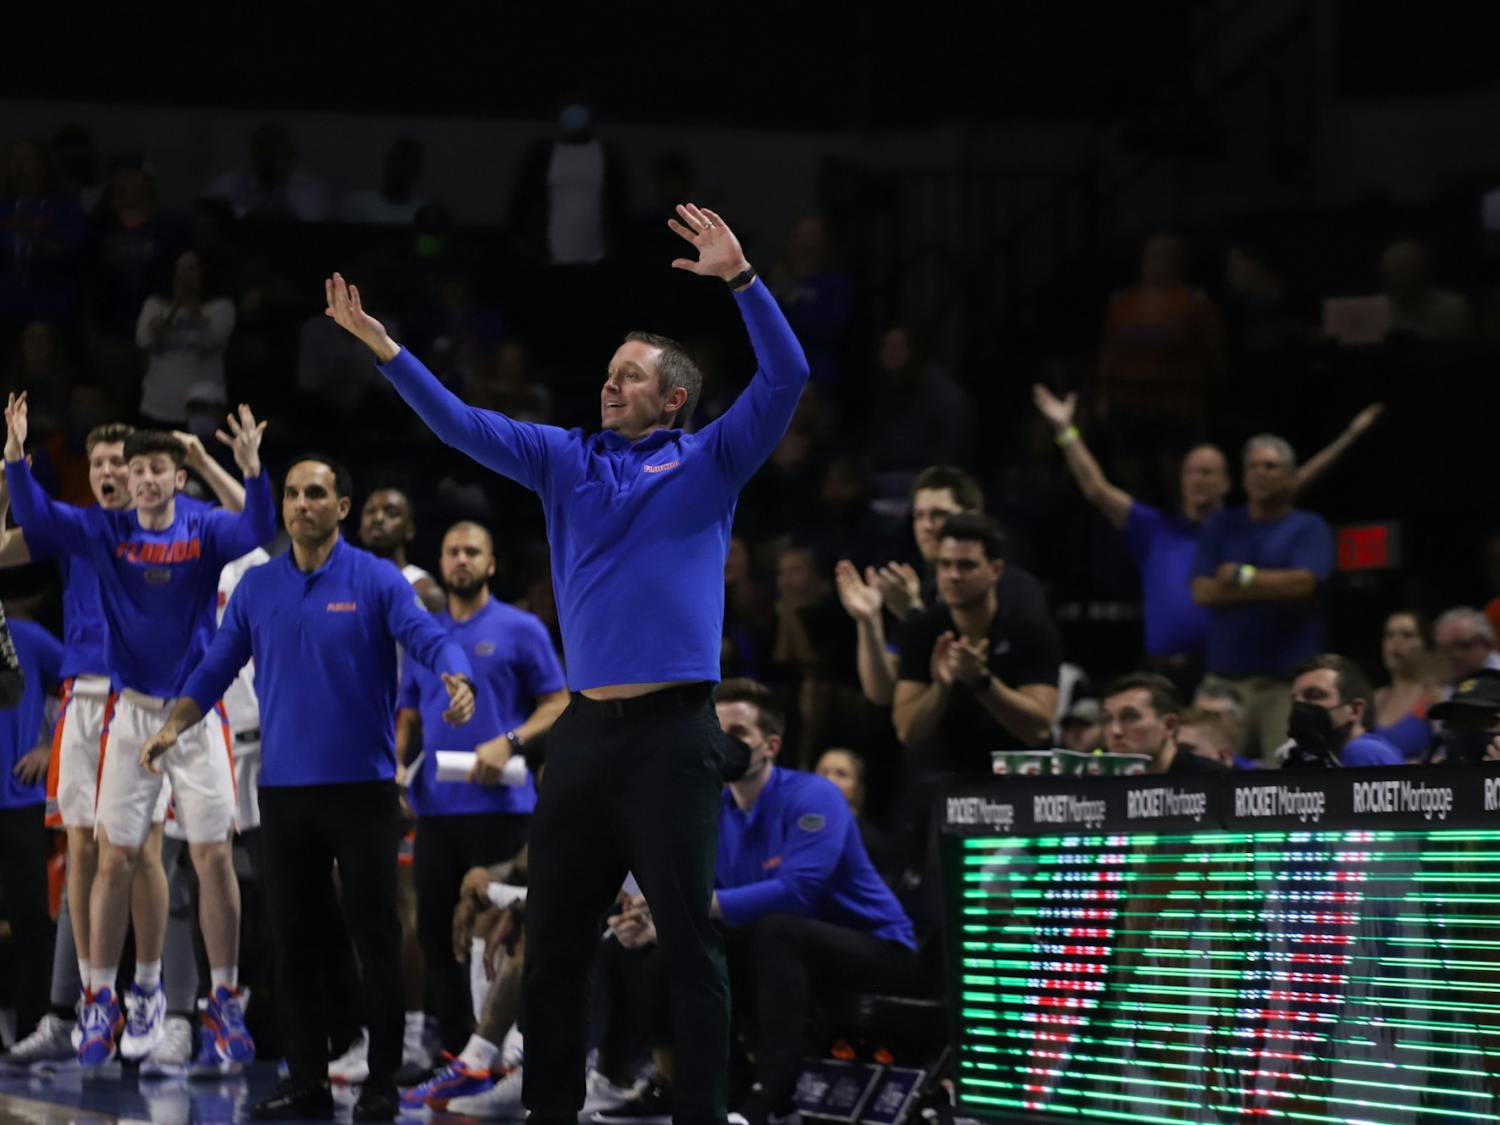 Gators head coach Mike White sends signals to his team during a Feb. 22 matchup with Arkansas. Florida lost in the second round of the SEC tournament 